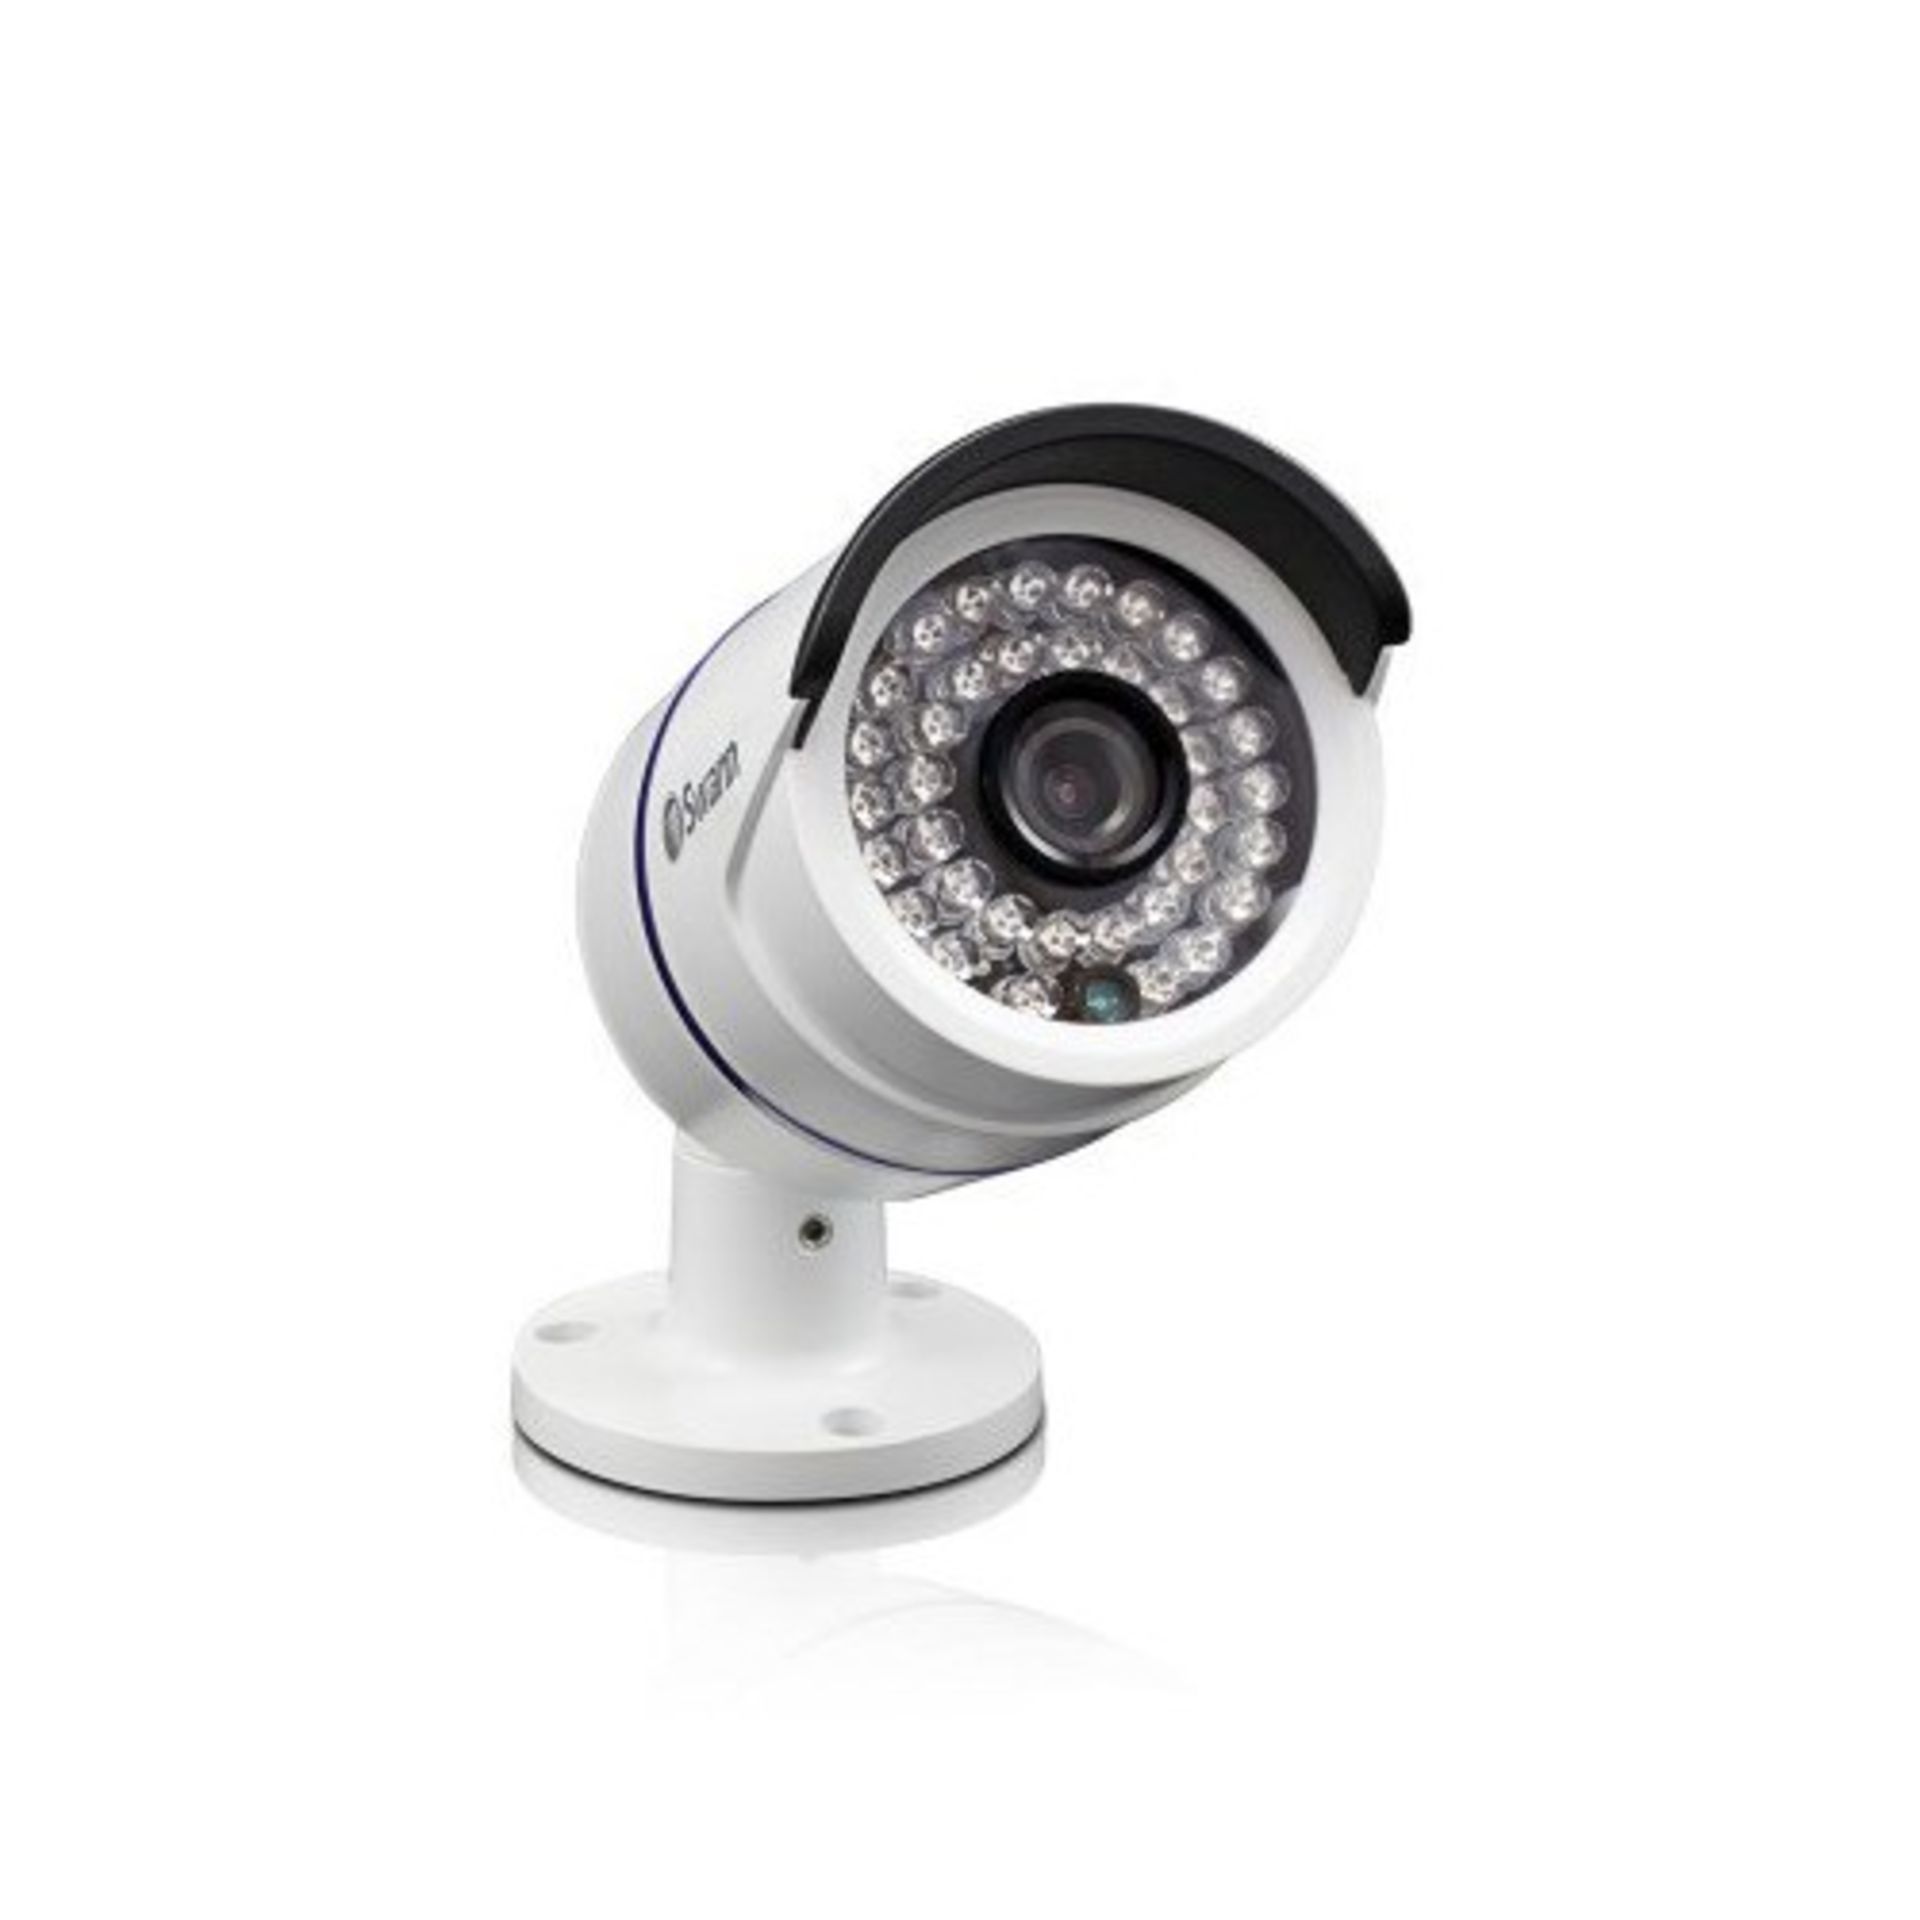 V *TRADE QTY* Brand New Swann HD NVR IP POE CCTV Security System With Two HD 720p Weatherproof - Image 2 of 3